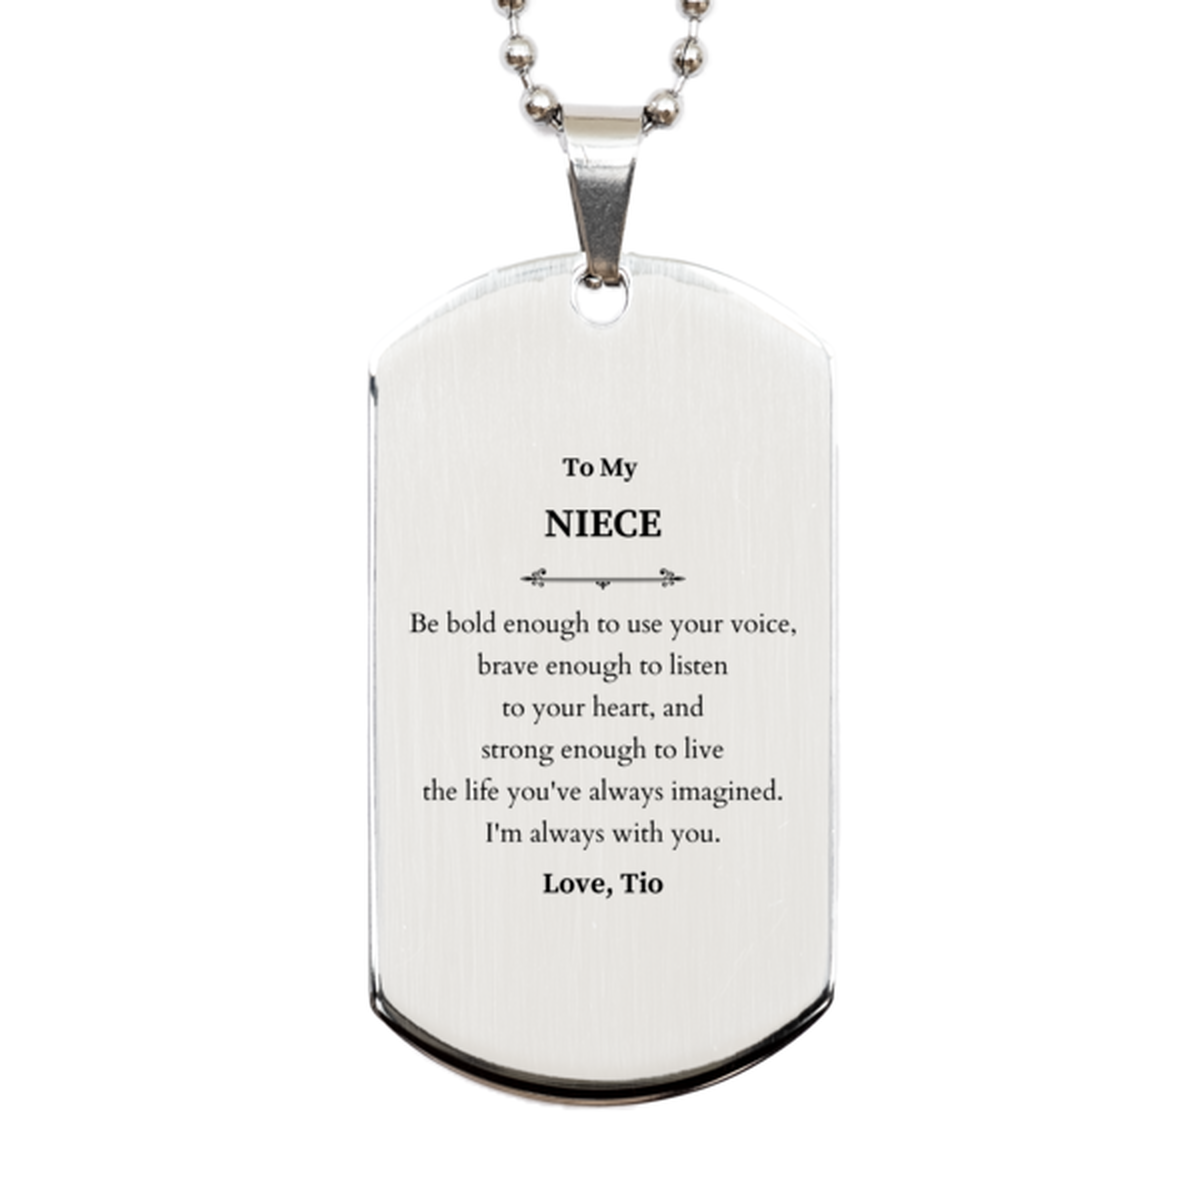 Keepsake Niece Silver Dog Tag Gift Idea Graduation Christmas Birthday Niece from Tio, Niece Be bold enough to use your voice, brave enough to listen to your heart. Love, Tio